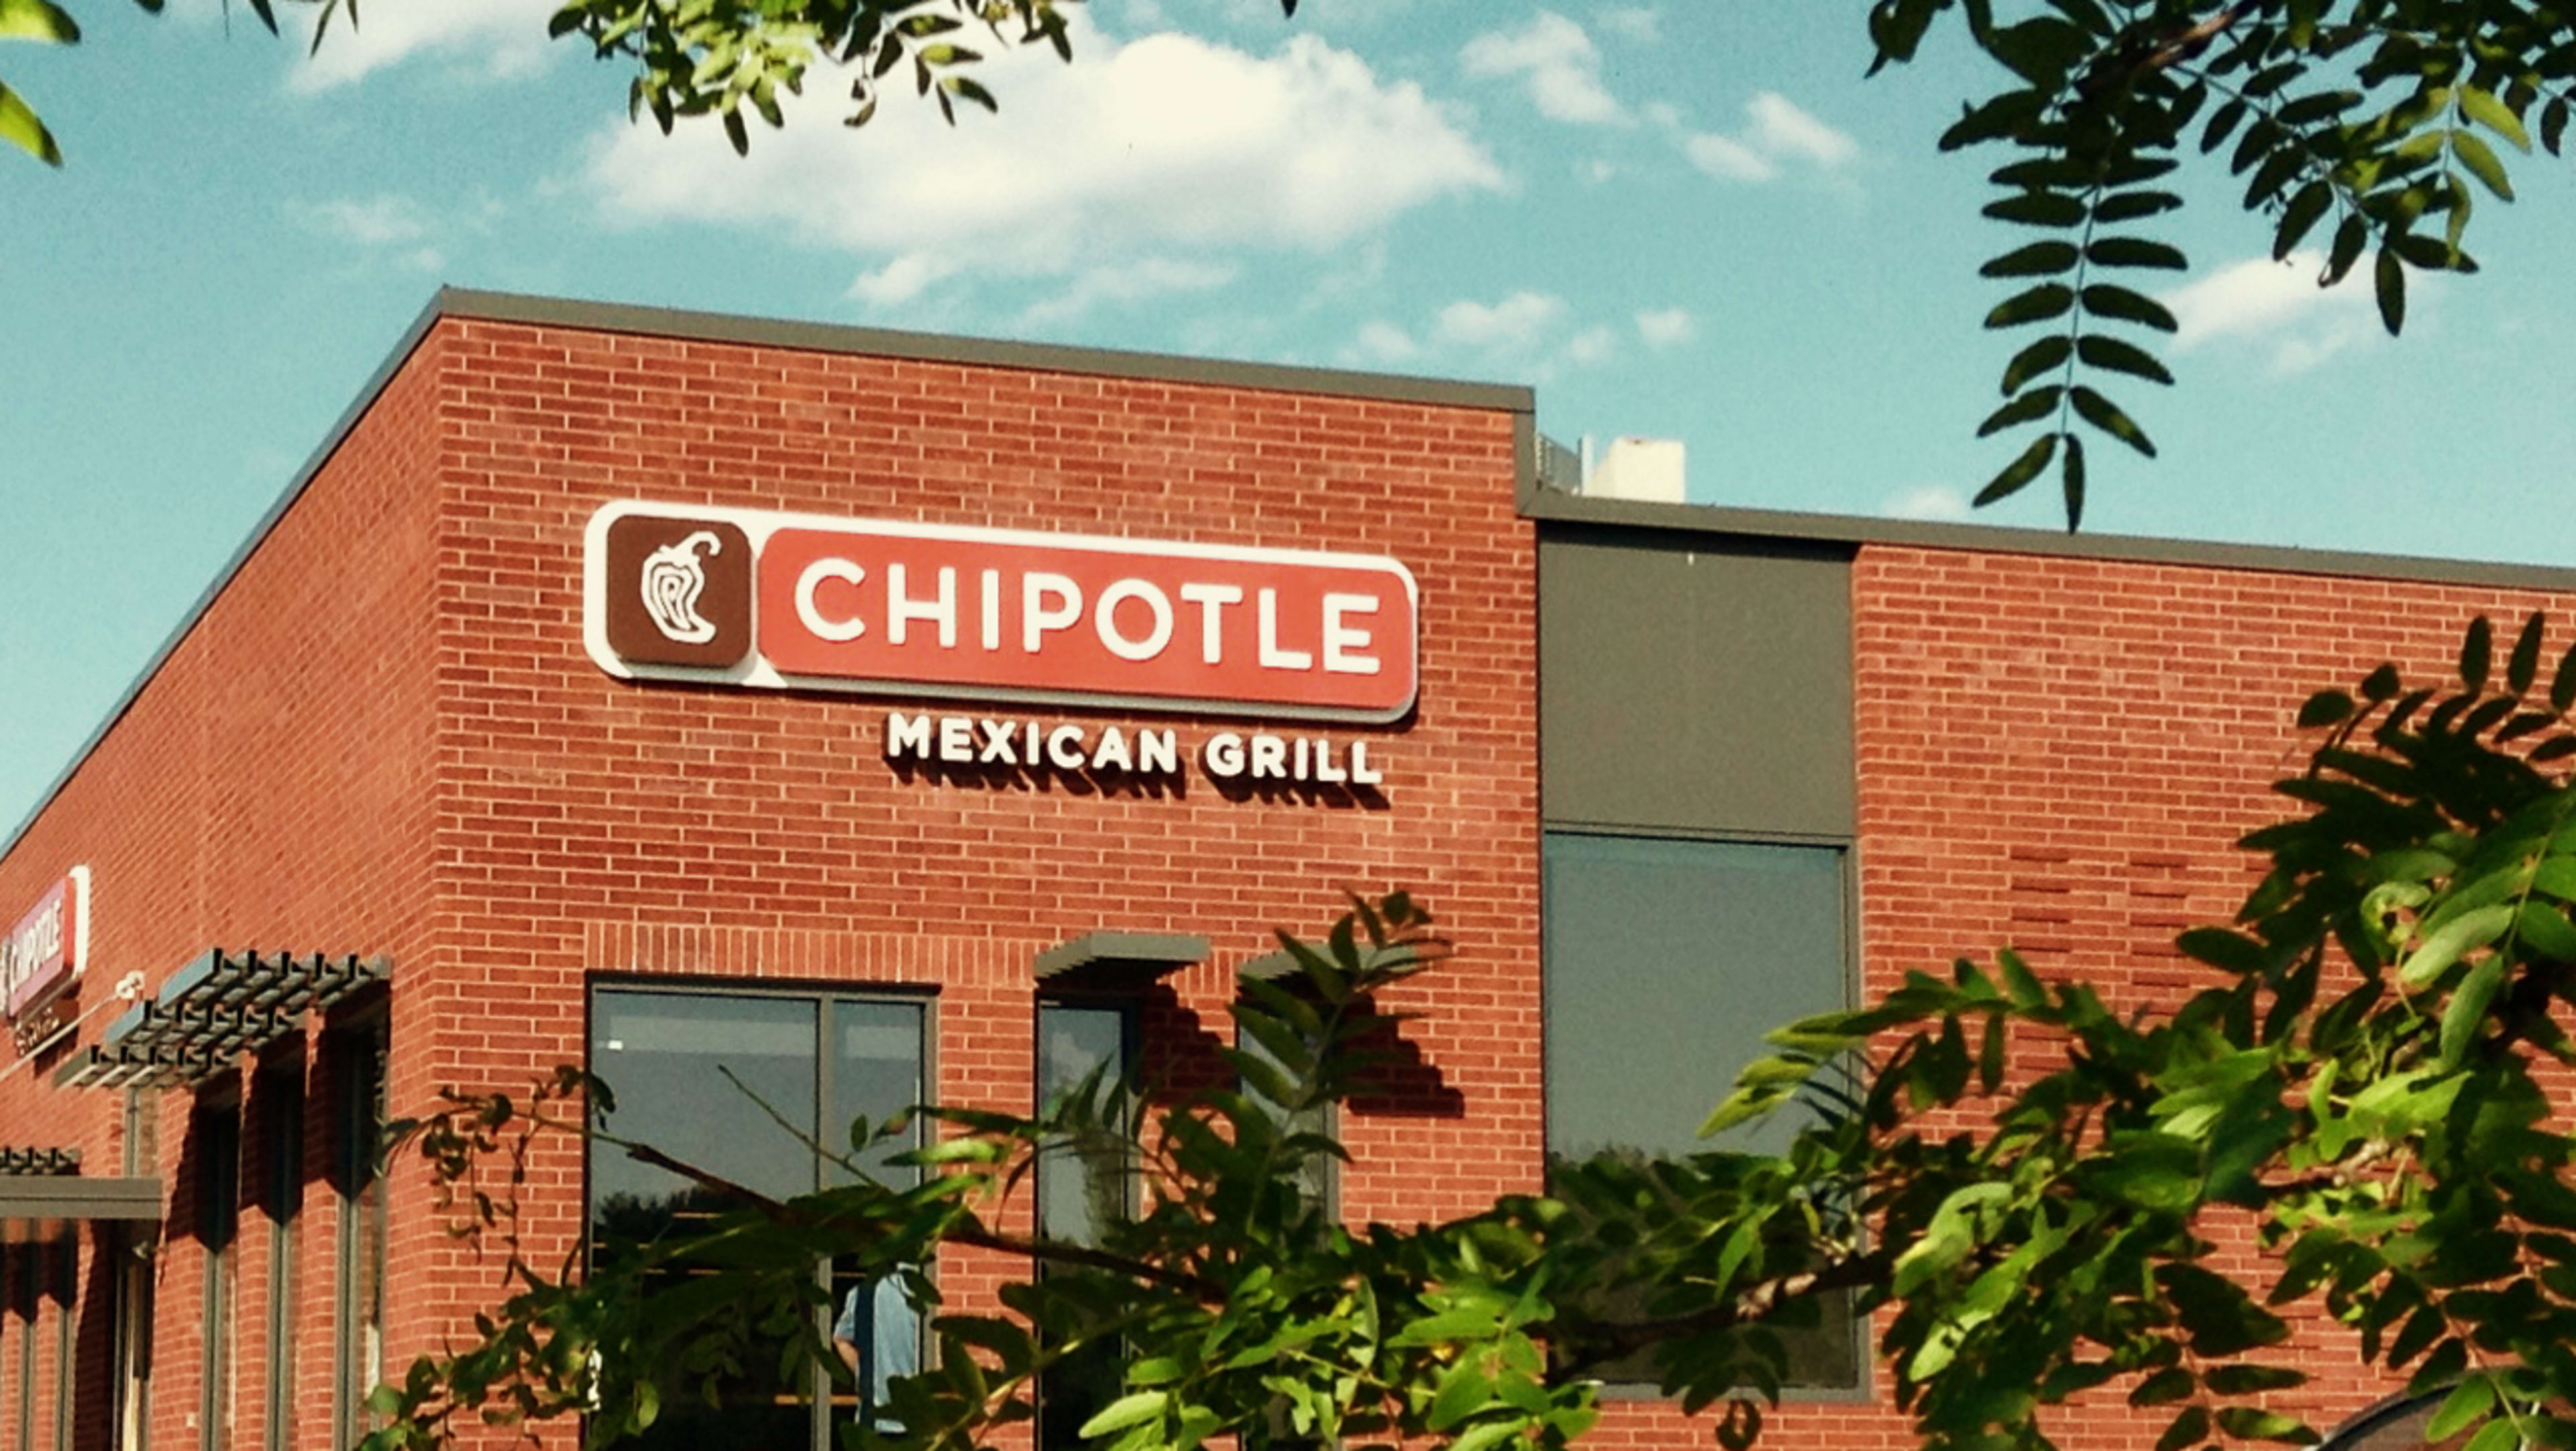 Chipotle slapped with $1.4M fine after ‘estimated 13,253 child labor violations’